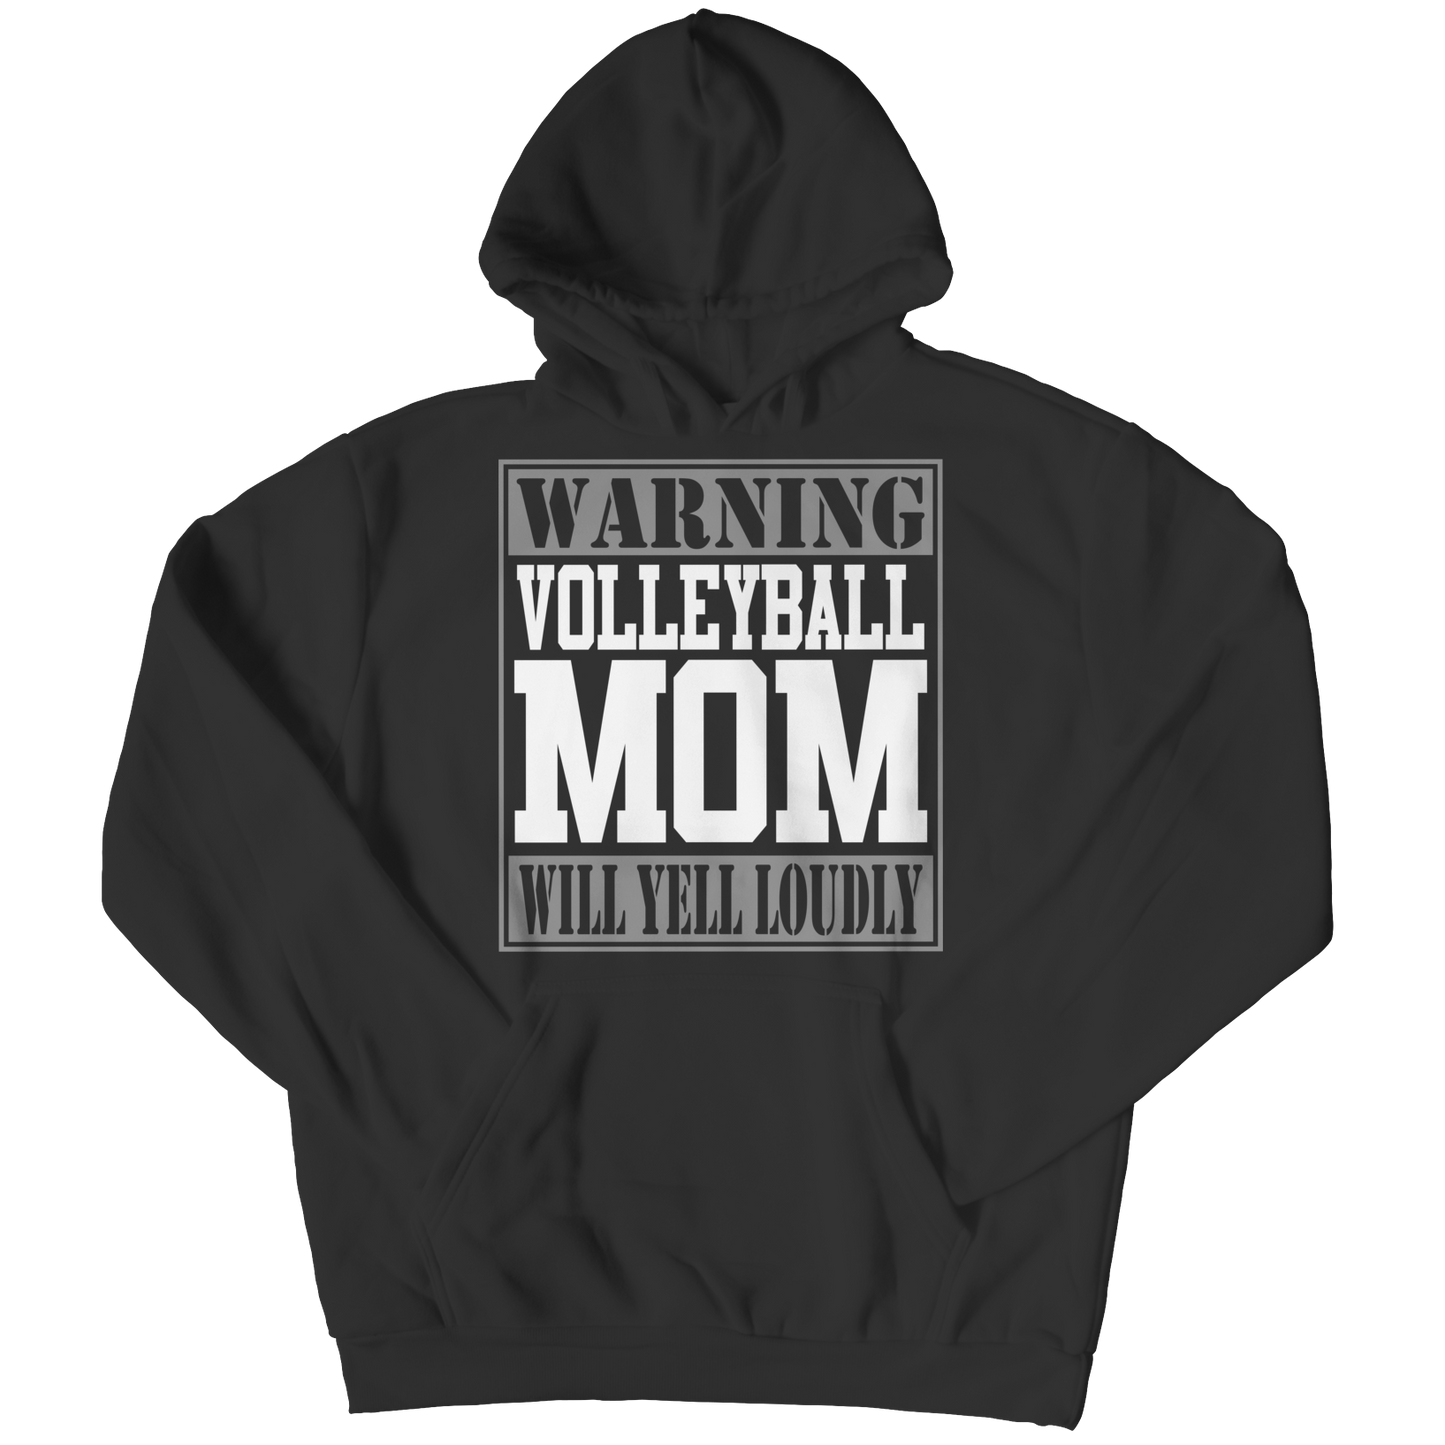 Limited Edition - Warning Volleyball Mom will Yell Loudly Shirt